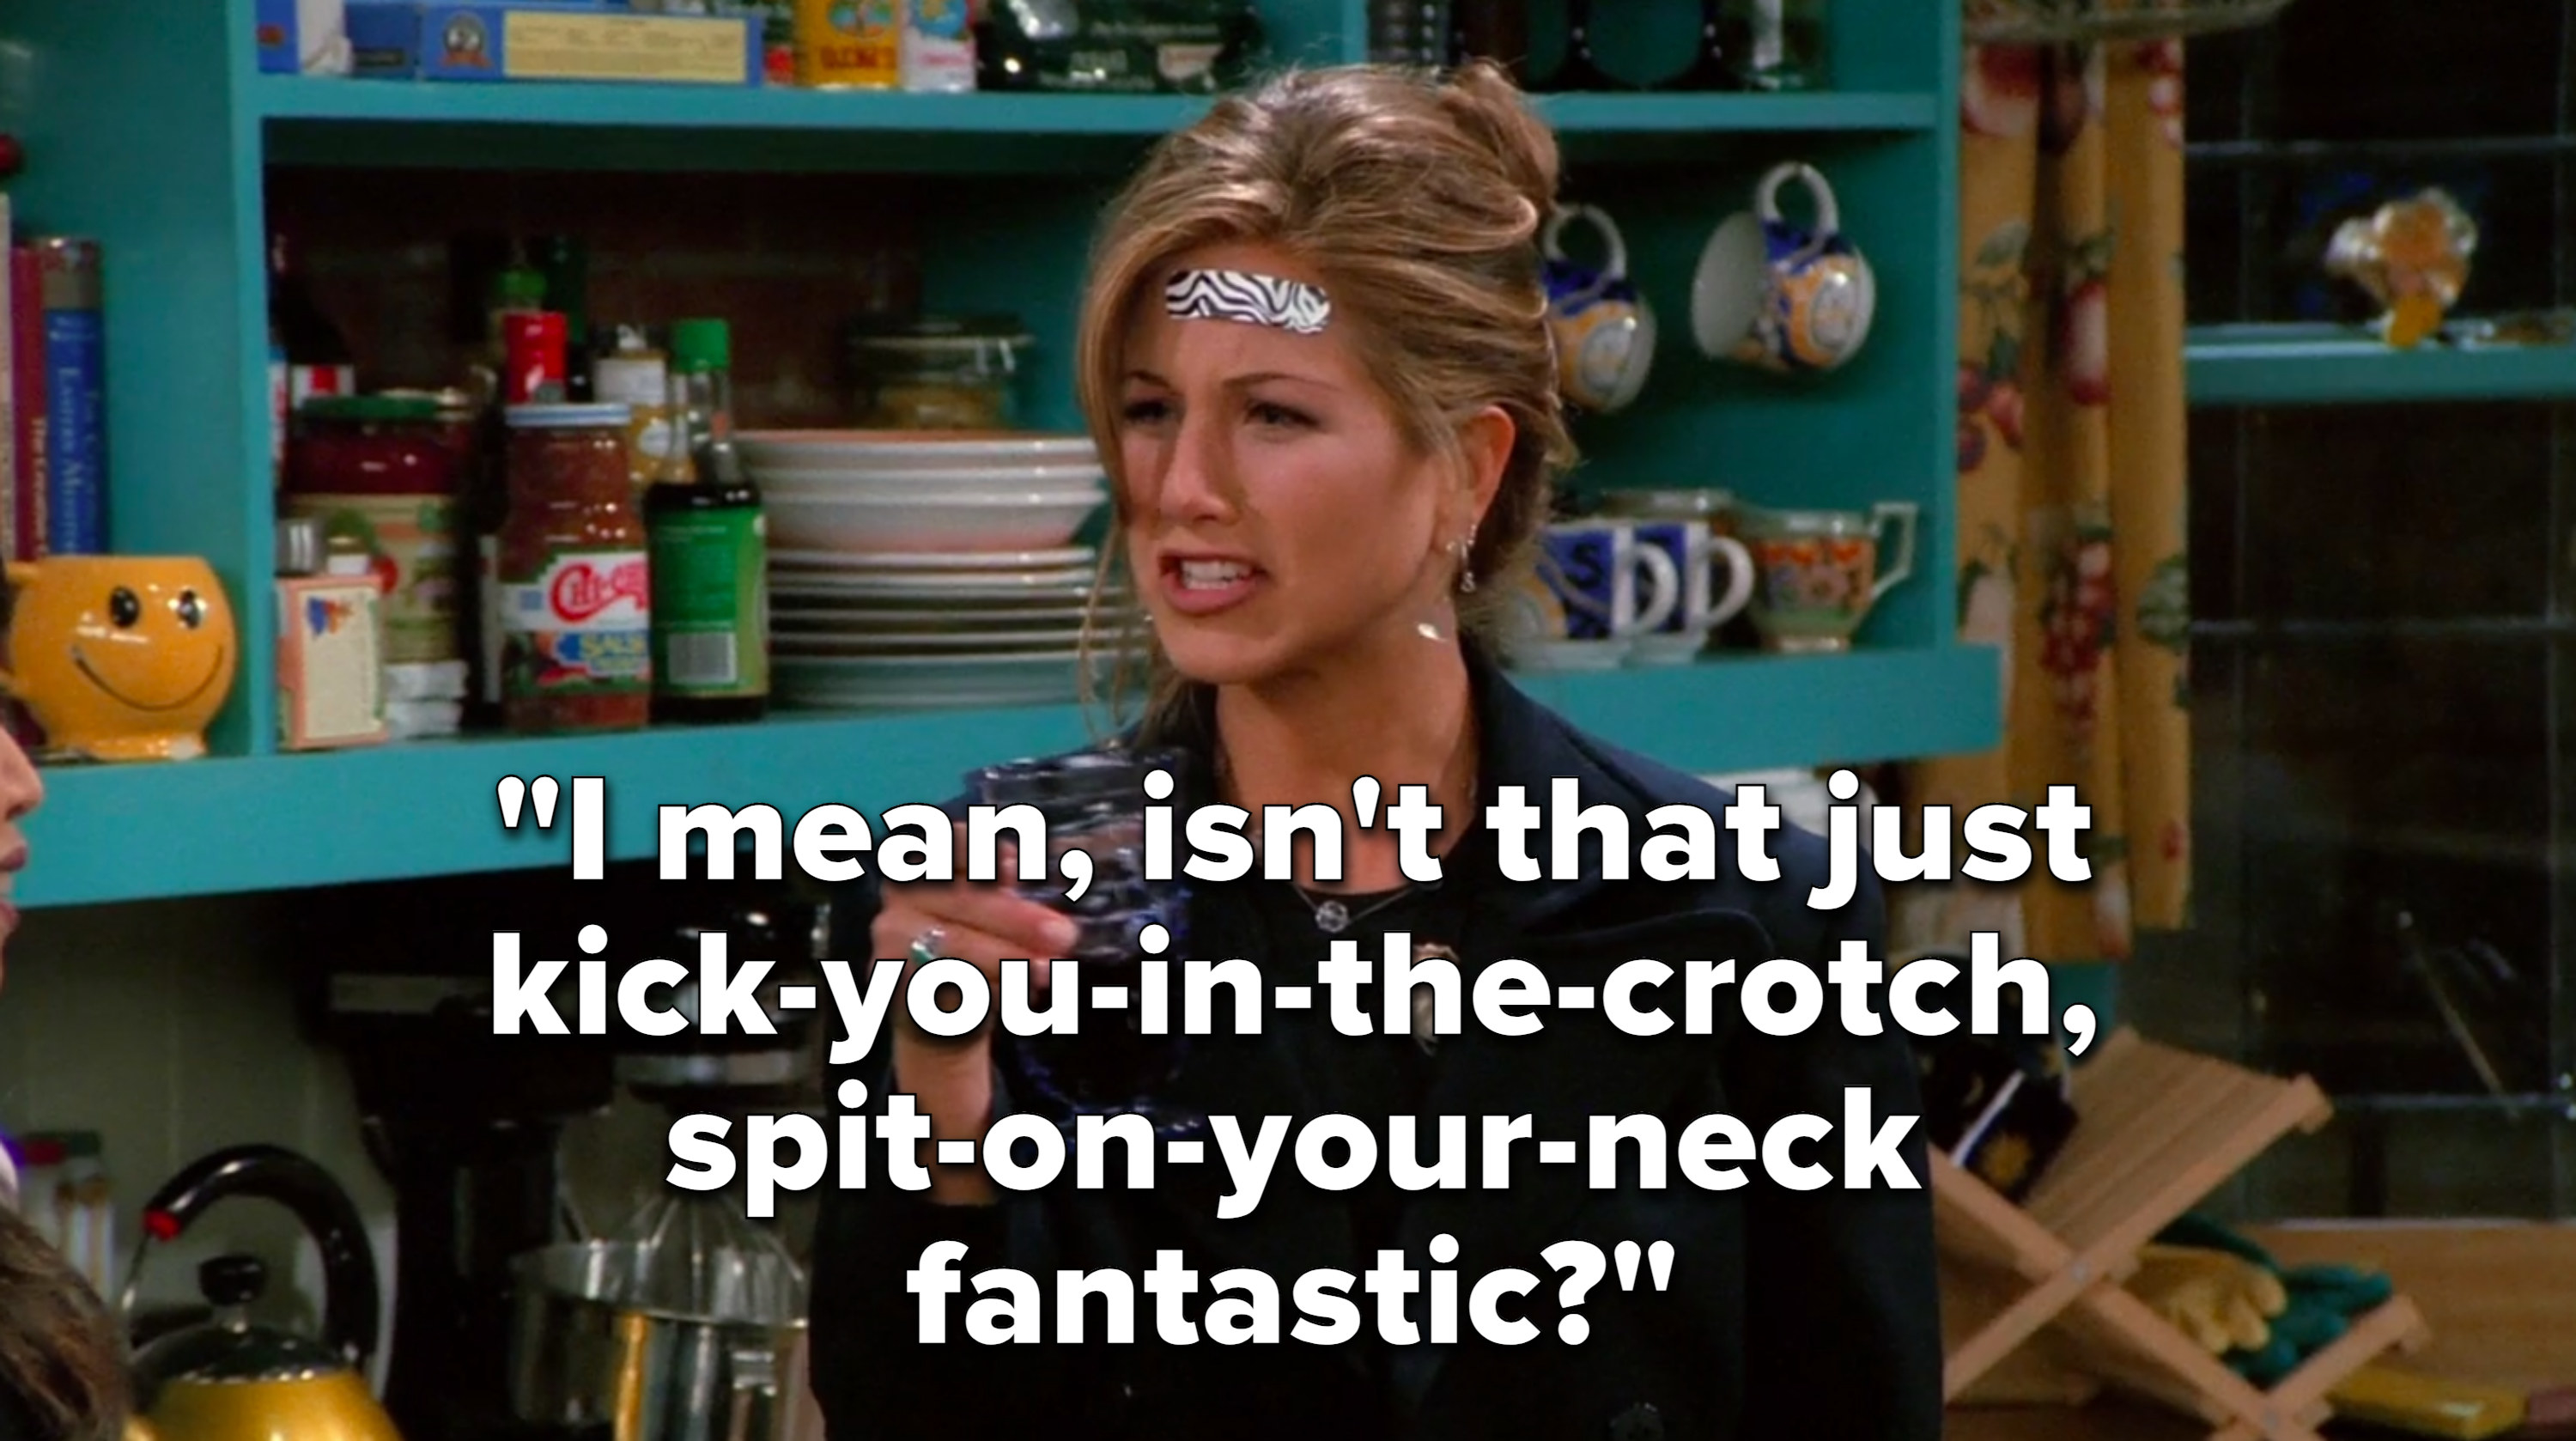 Rachel says, I mean, isnt that just kick you in the crotch, spit on your neck fantastic